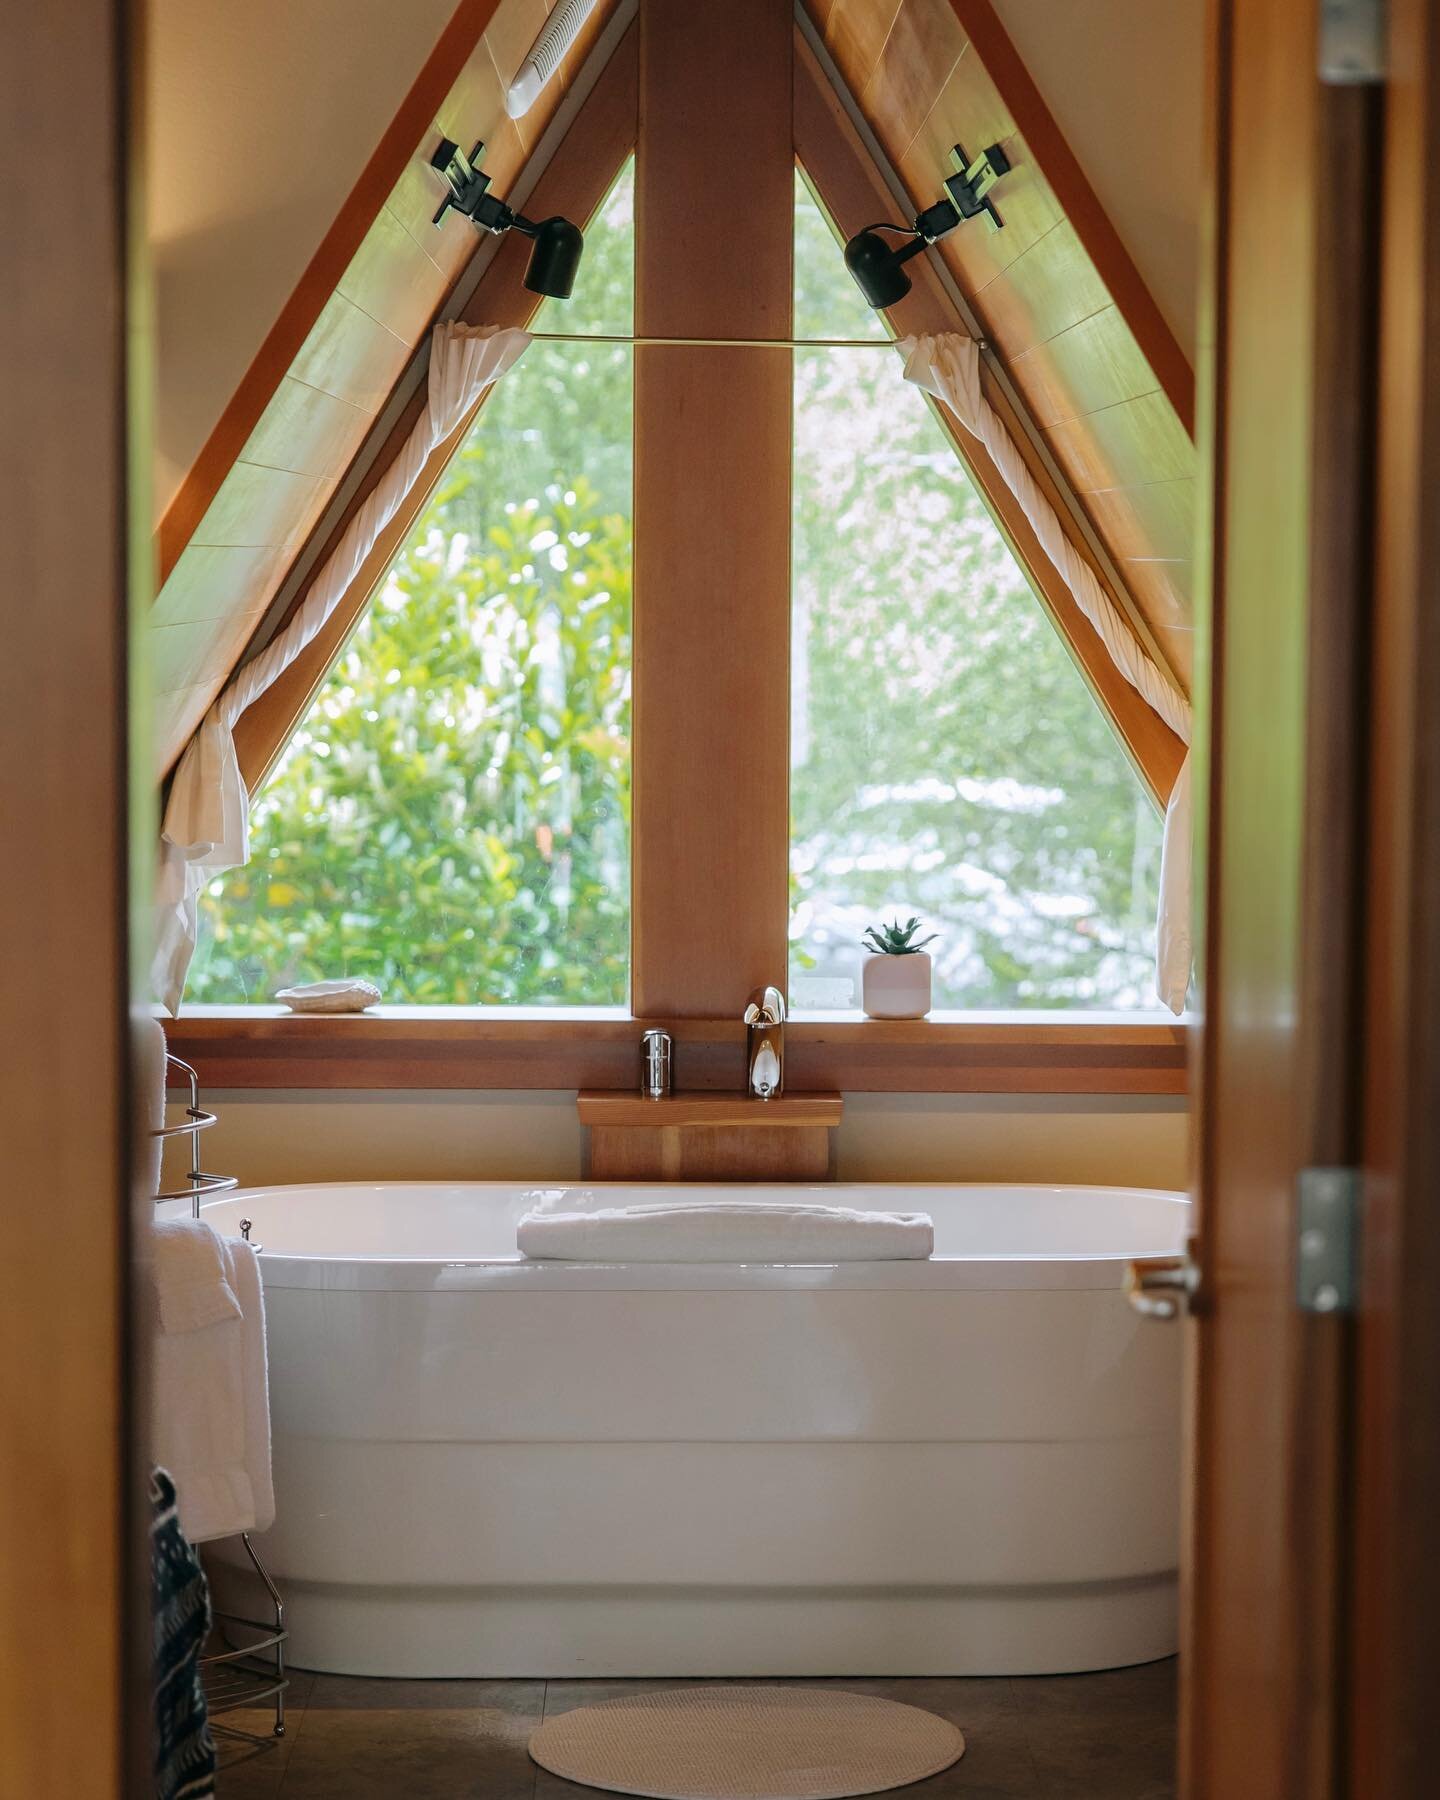 Treat yourself 💫 

Cabin suite 2 with the self care deep soaker tub 🤍 

📸 @lexis_lancaster 

#theshorelinetofino #wakeuphere #cabinsuite2